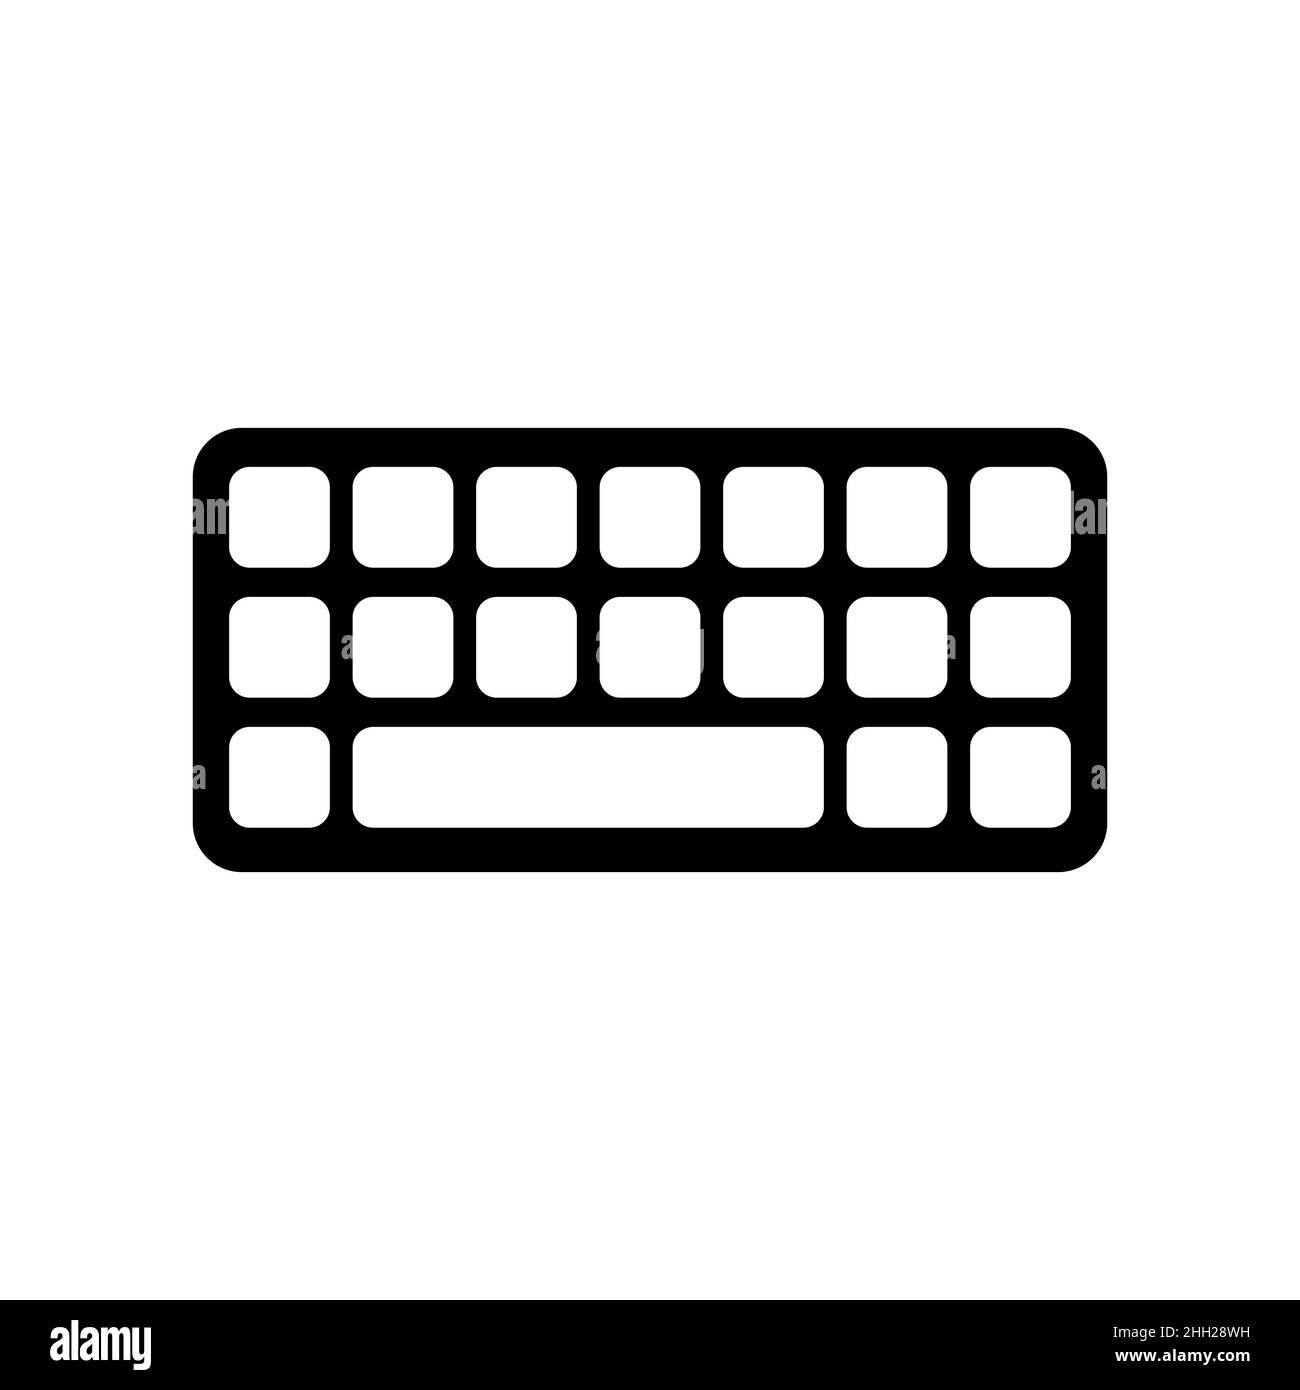 keyboard icon or logo isolated sign symbol vector illustration - high quality black style vector icons EPS 10 Stock Vector